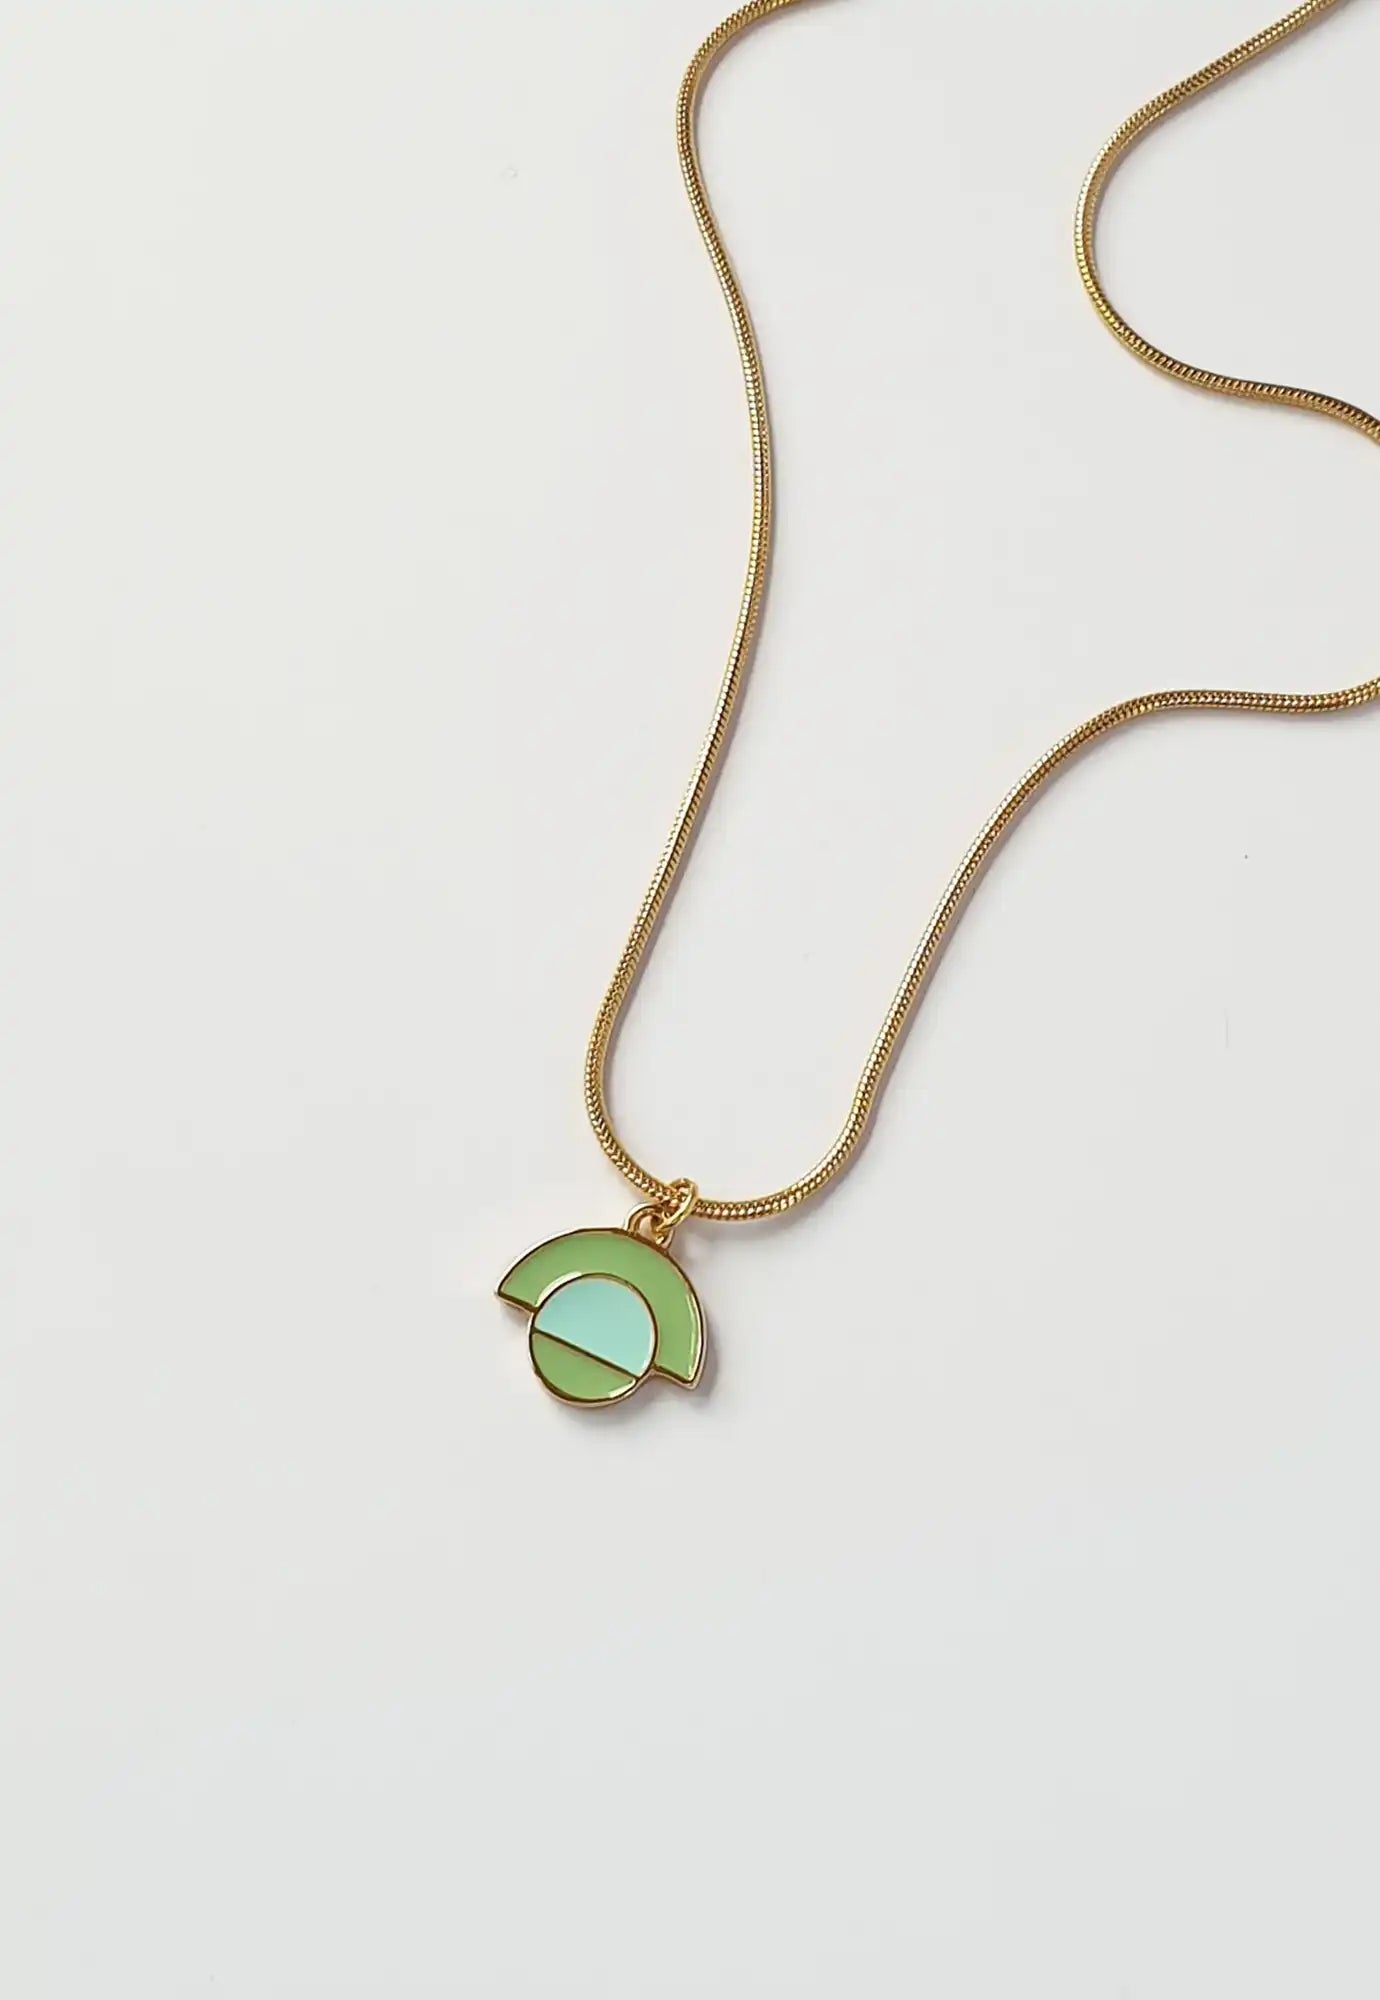 middle child - sixpence necklace